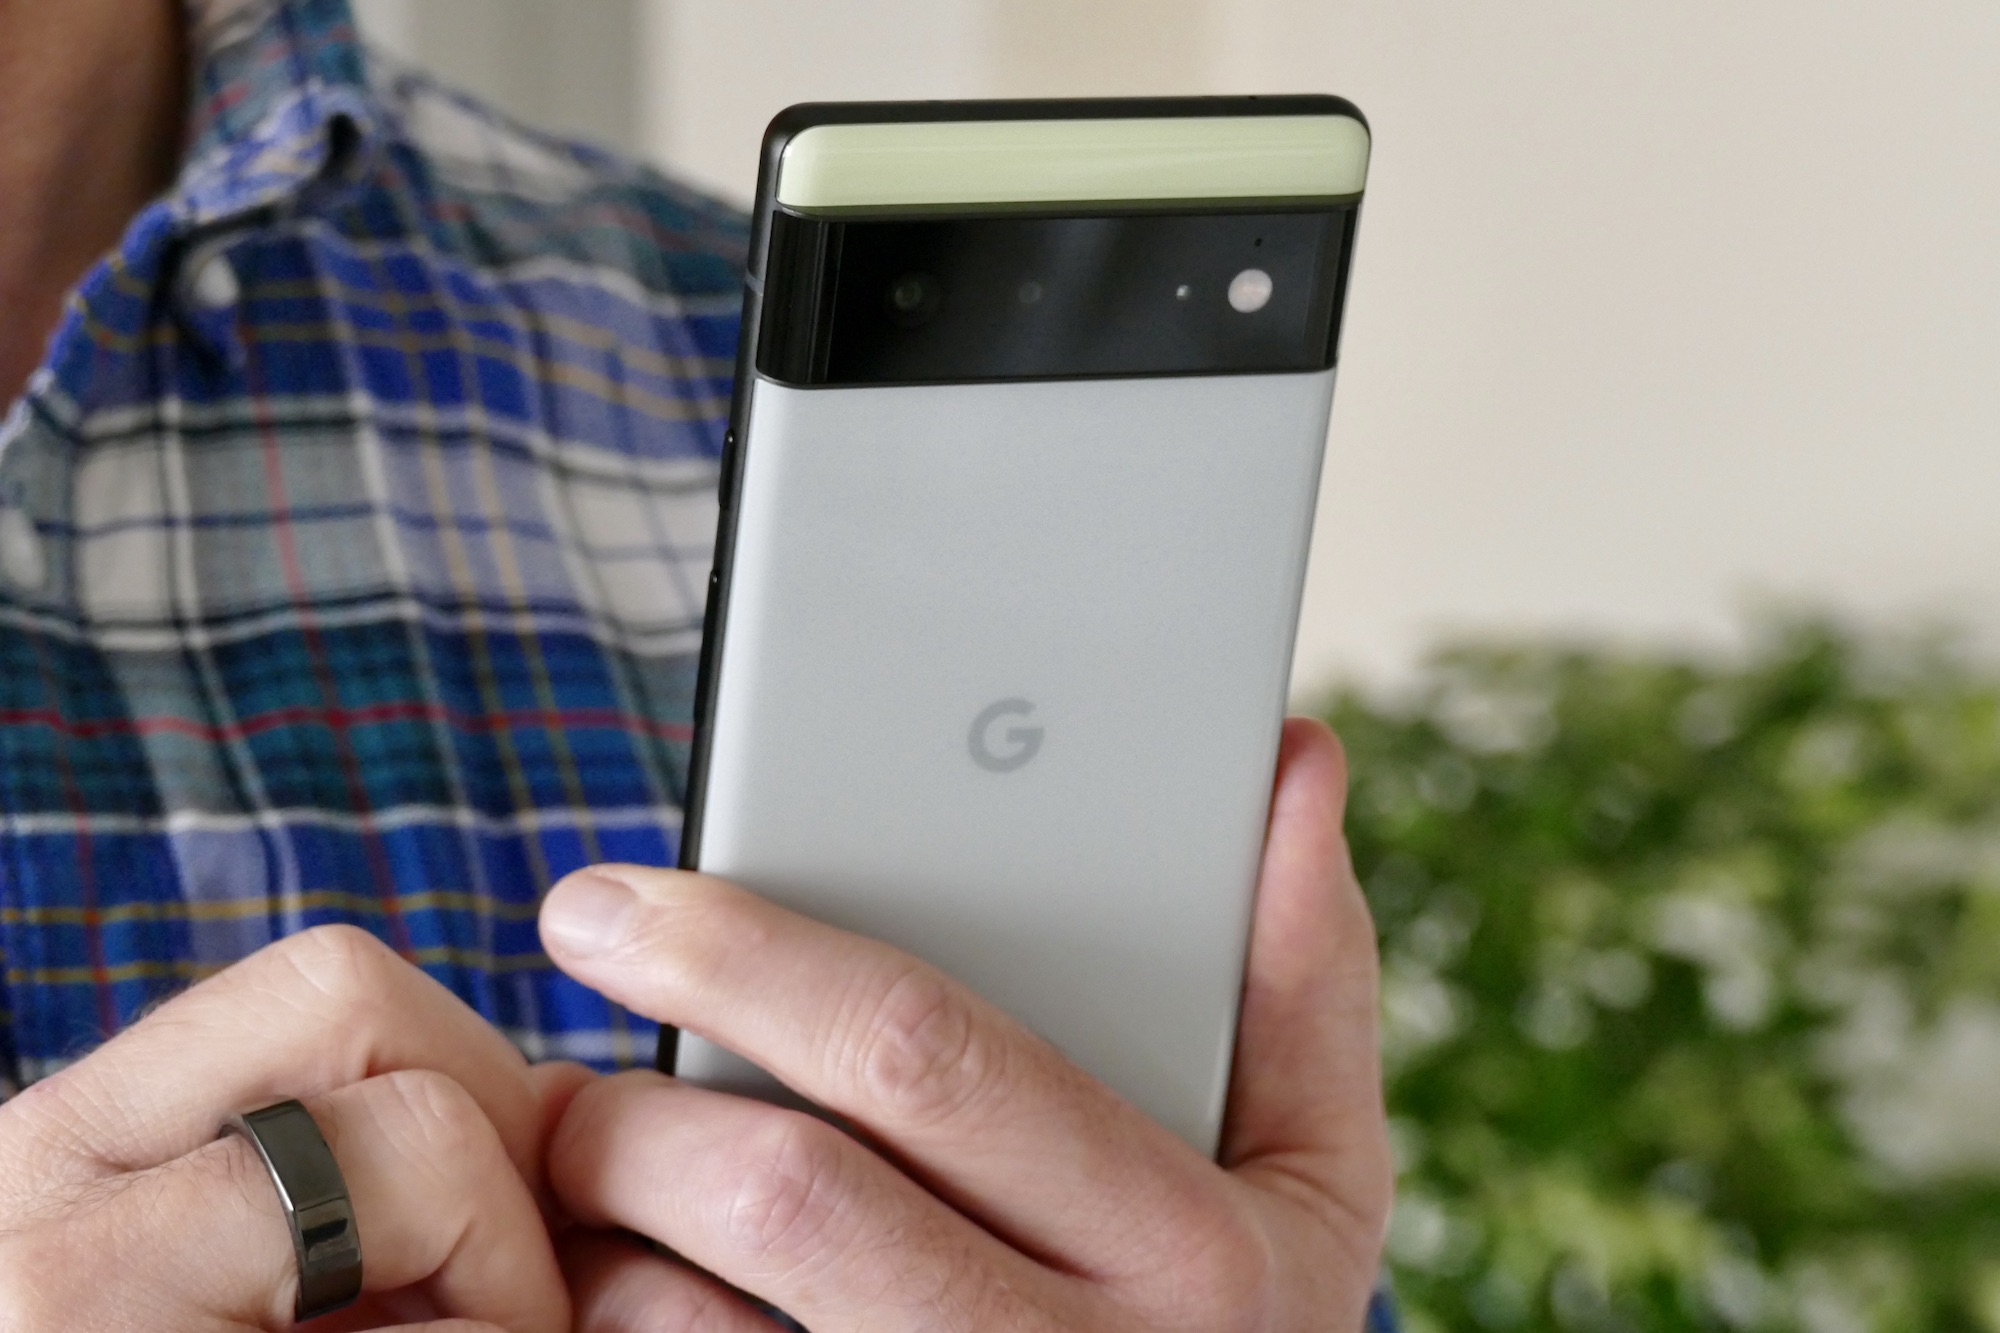 Google Pixel 6 Reviews, Pros and Cons